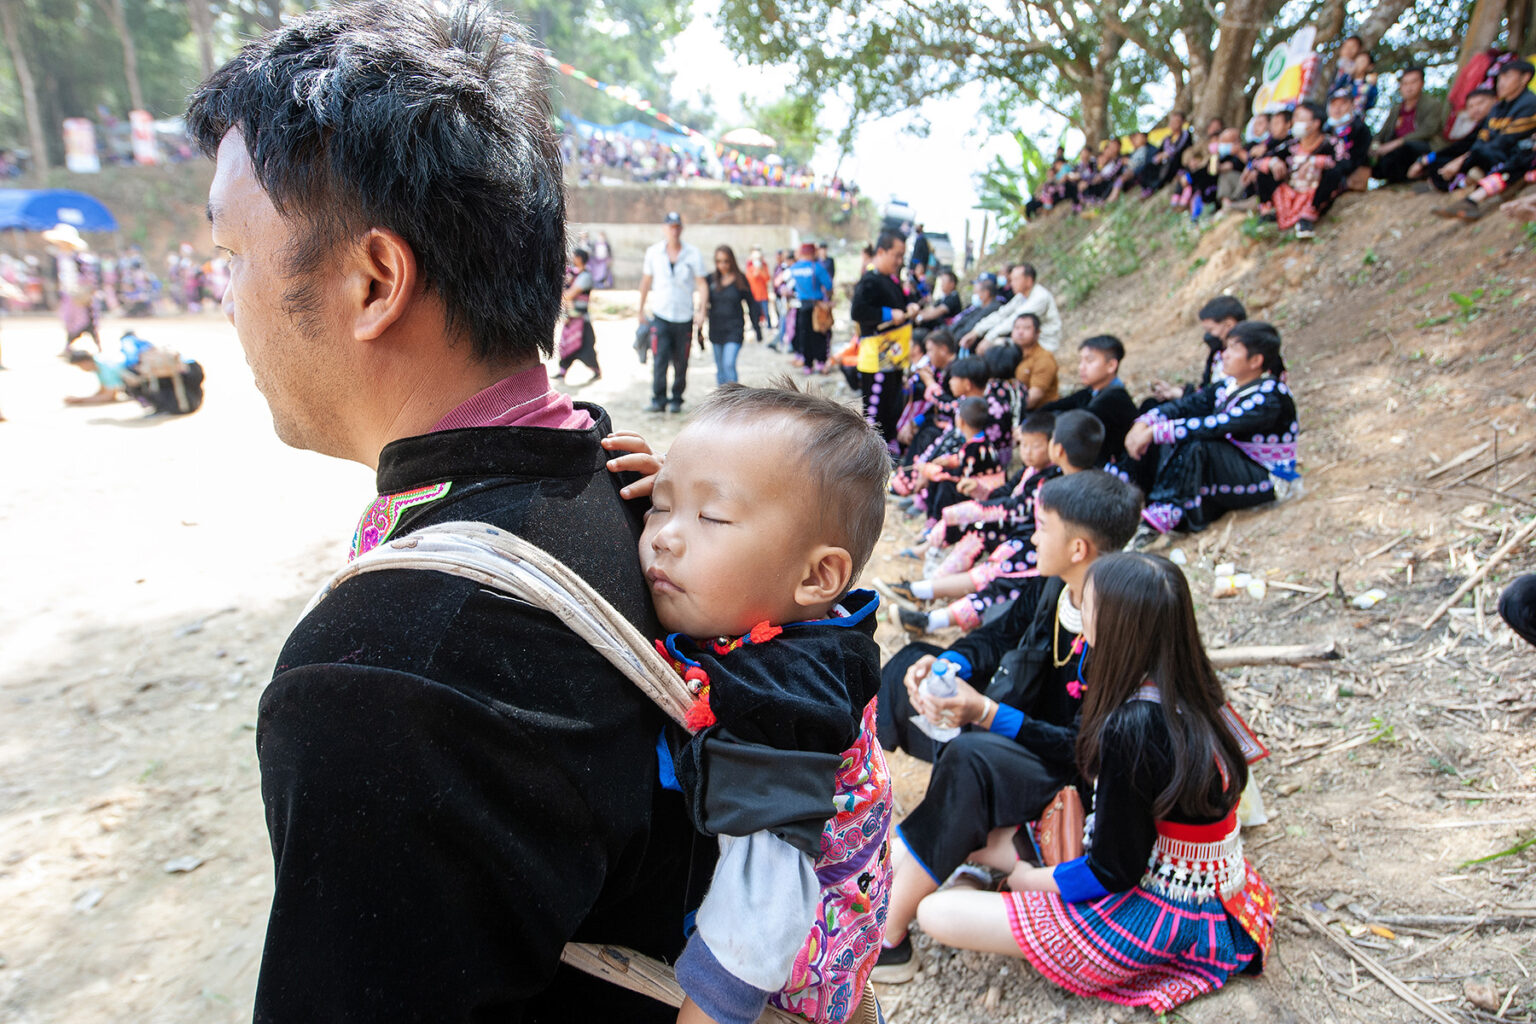 Hmong hill tribe man carries his sleeping baby on his back in a sling during the Hmong New Year celebrations.